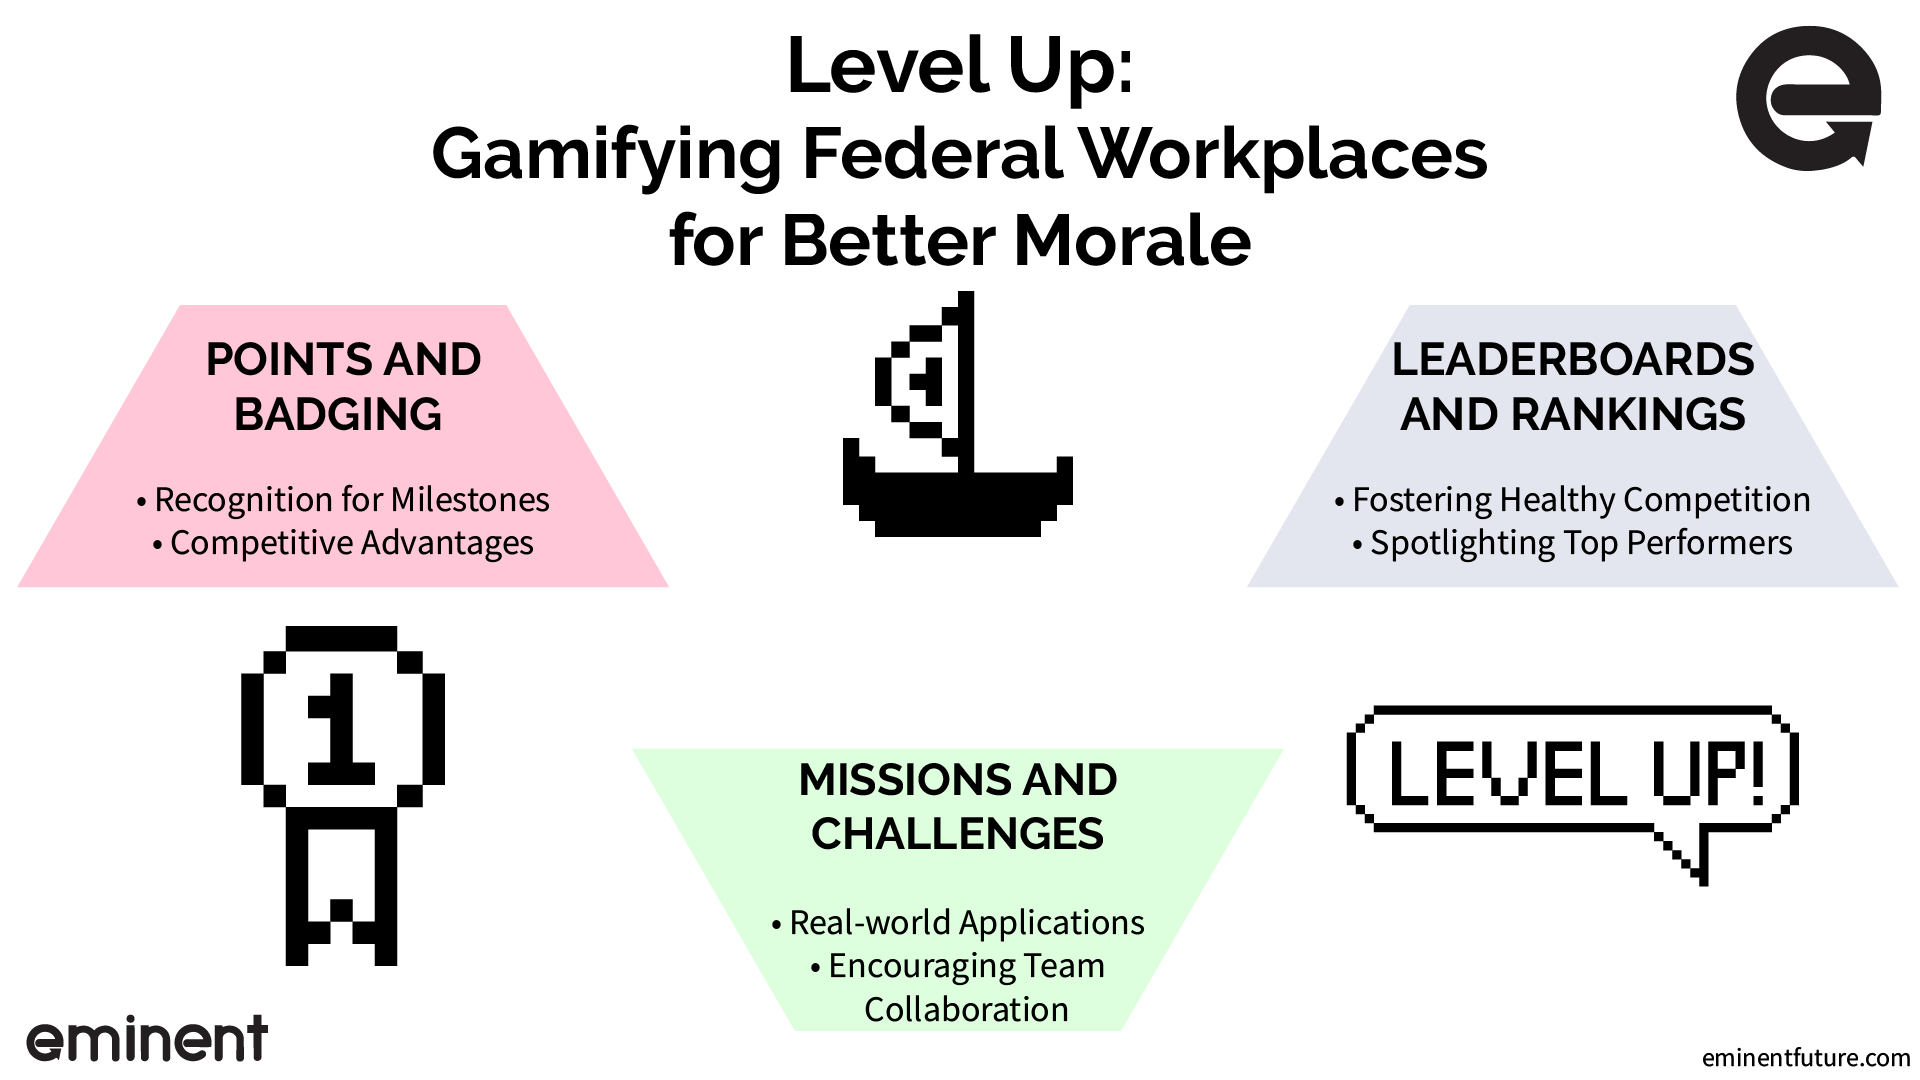 How to Inspire a High Performance Workplace with Leaderboards